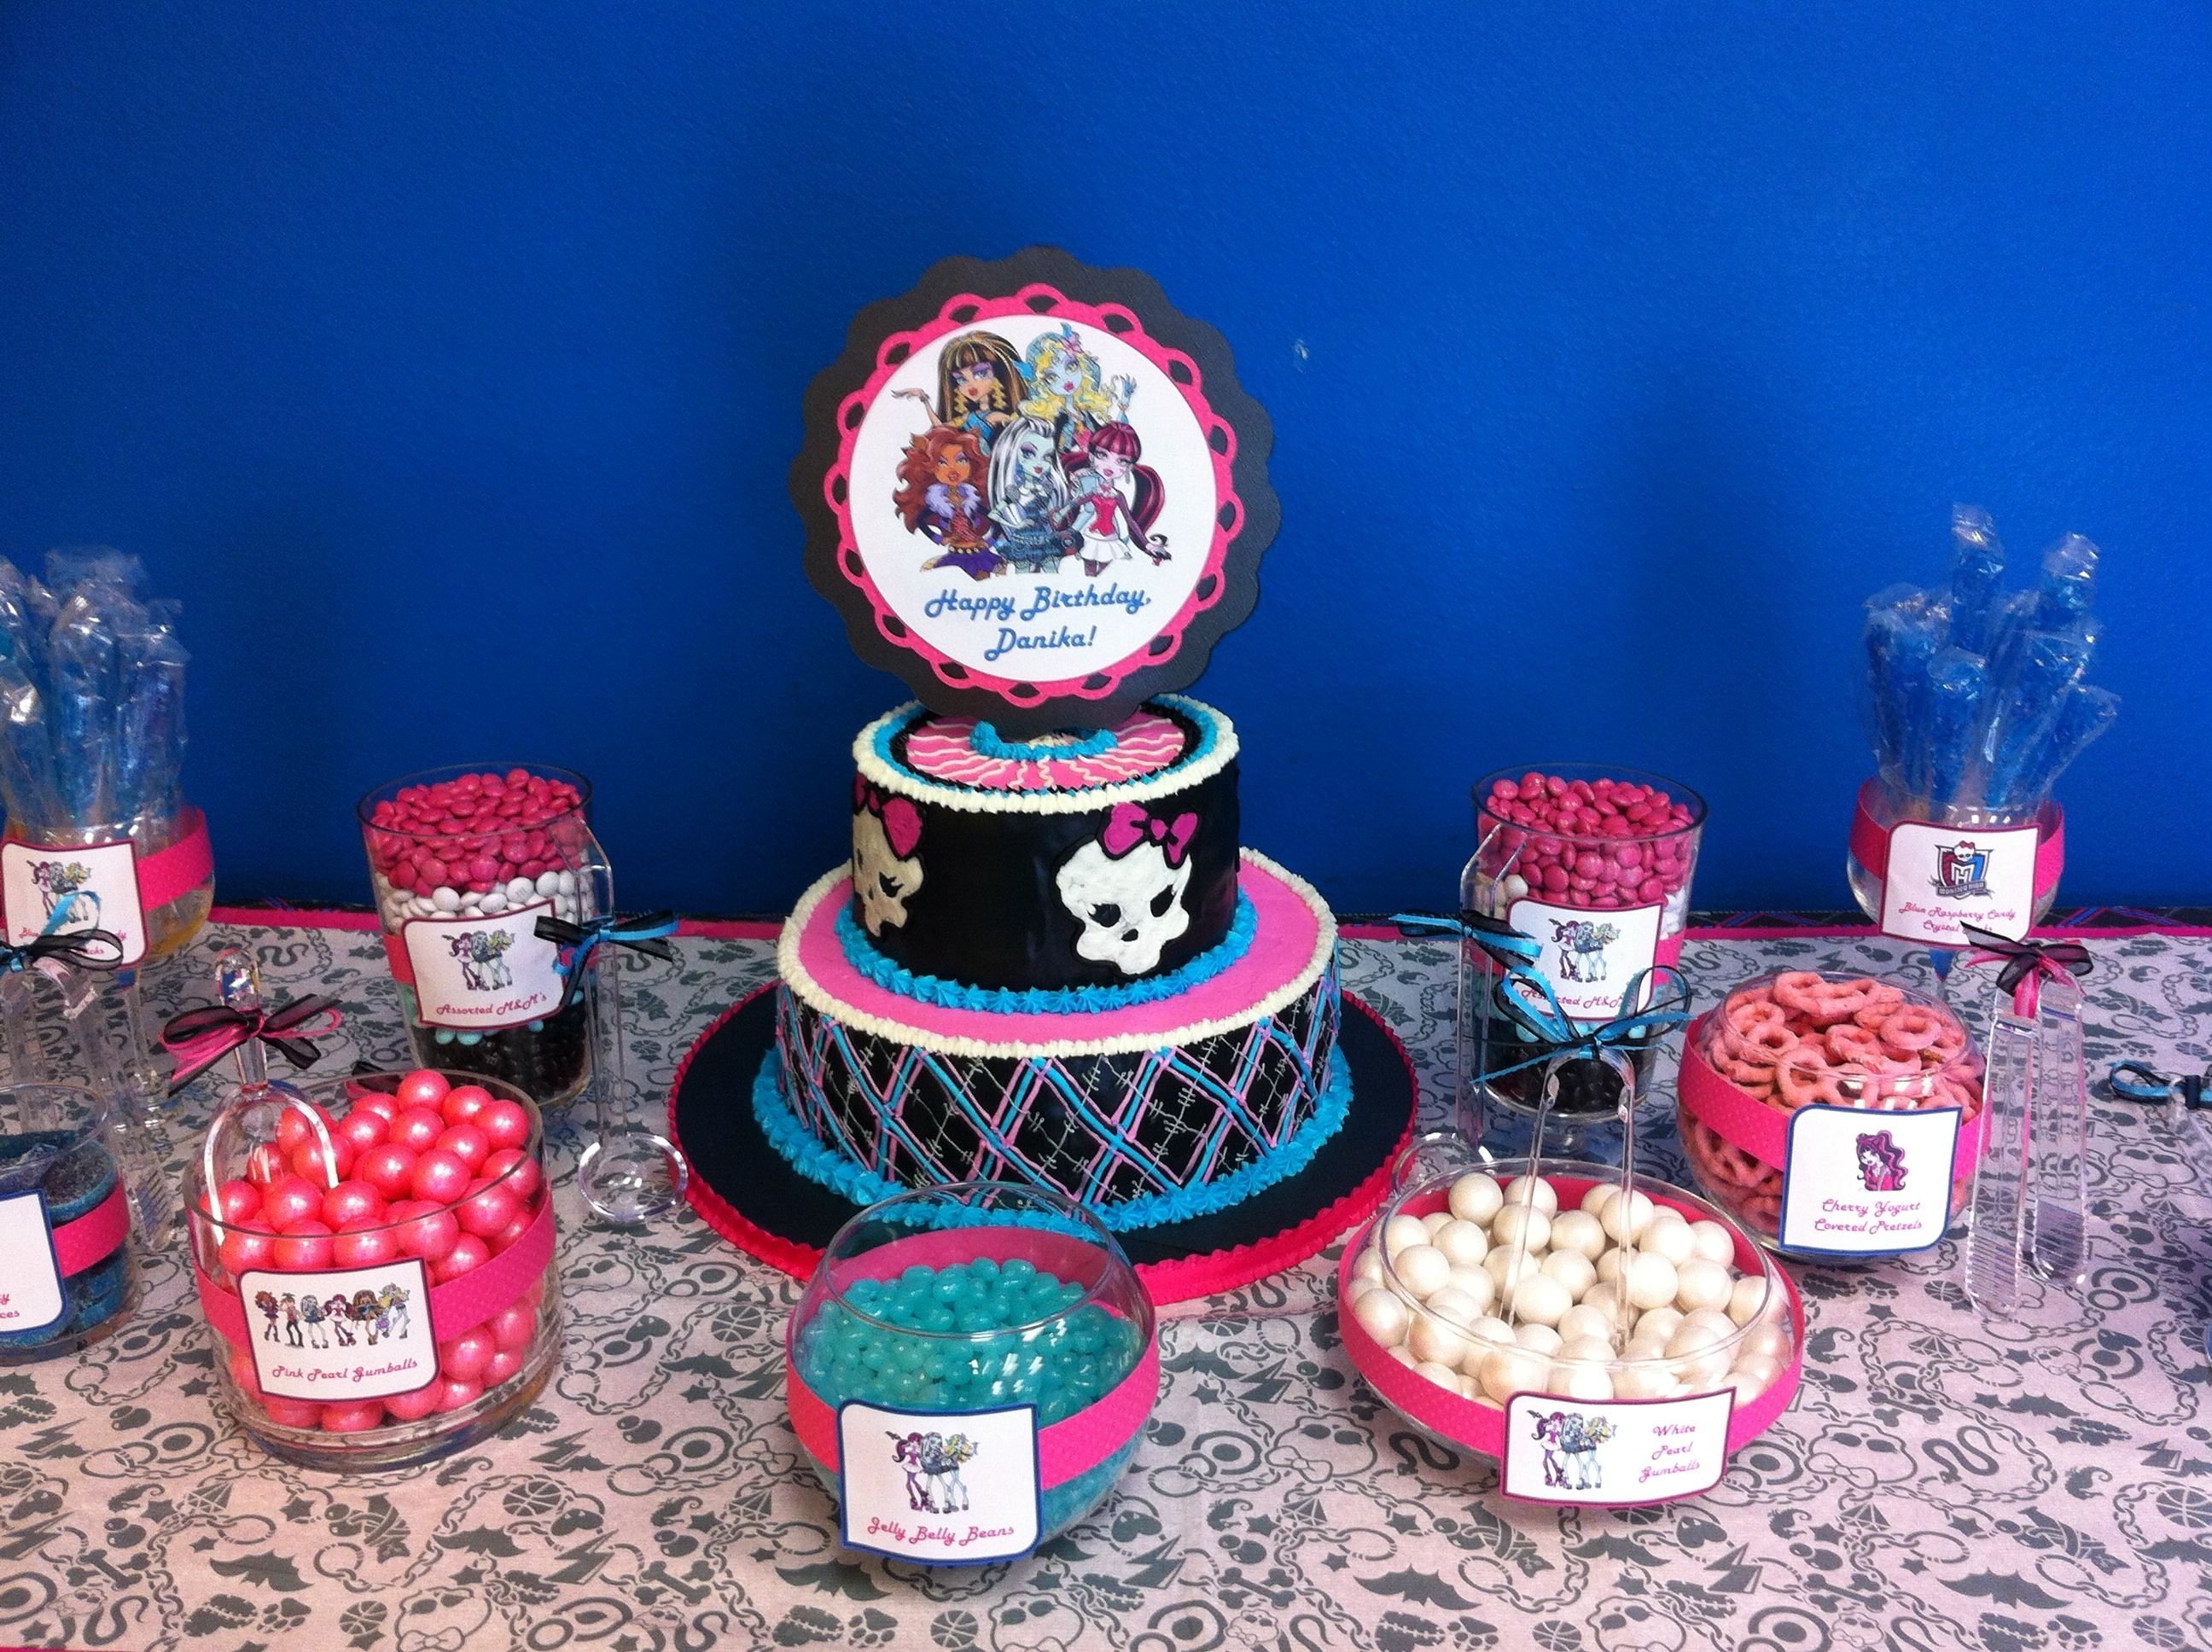 10 Elegant Monster High Birthday Party Ideas monster high birthday party ideas monster high birthday candy 1 2022